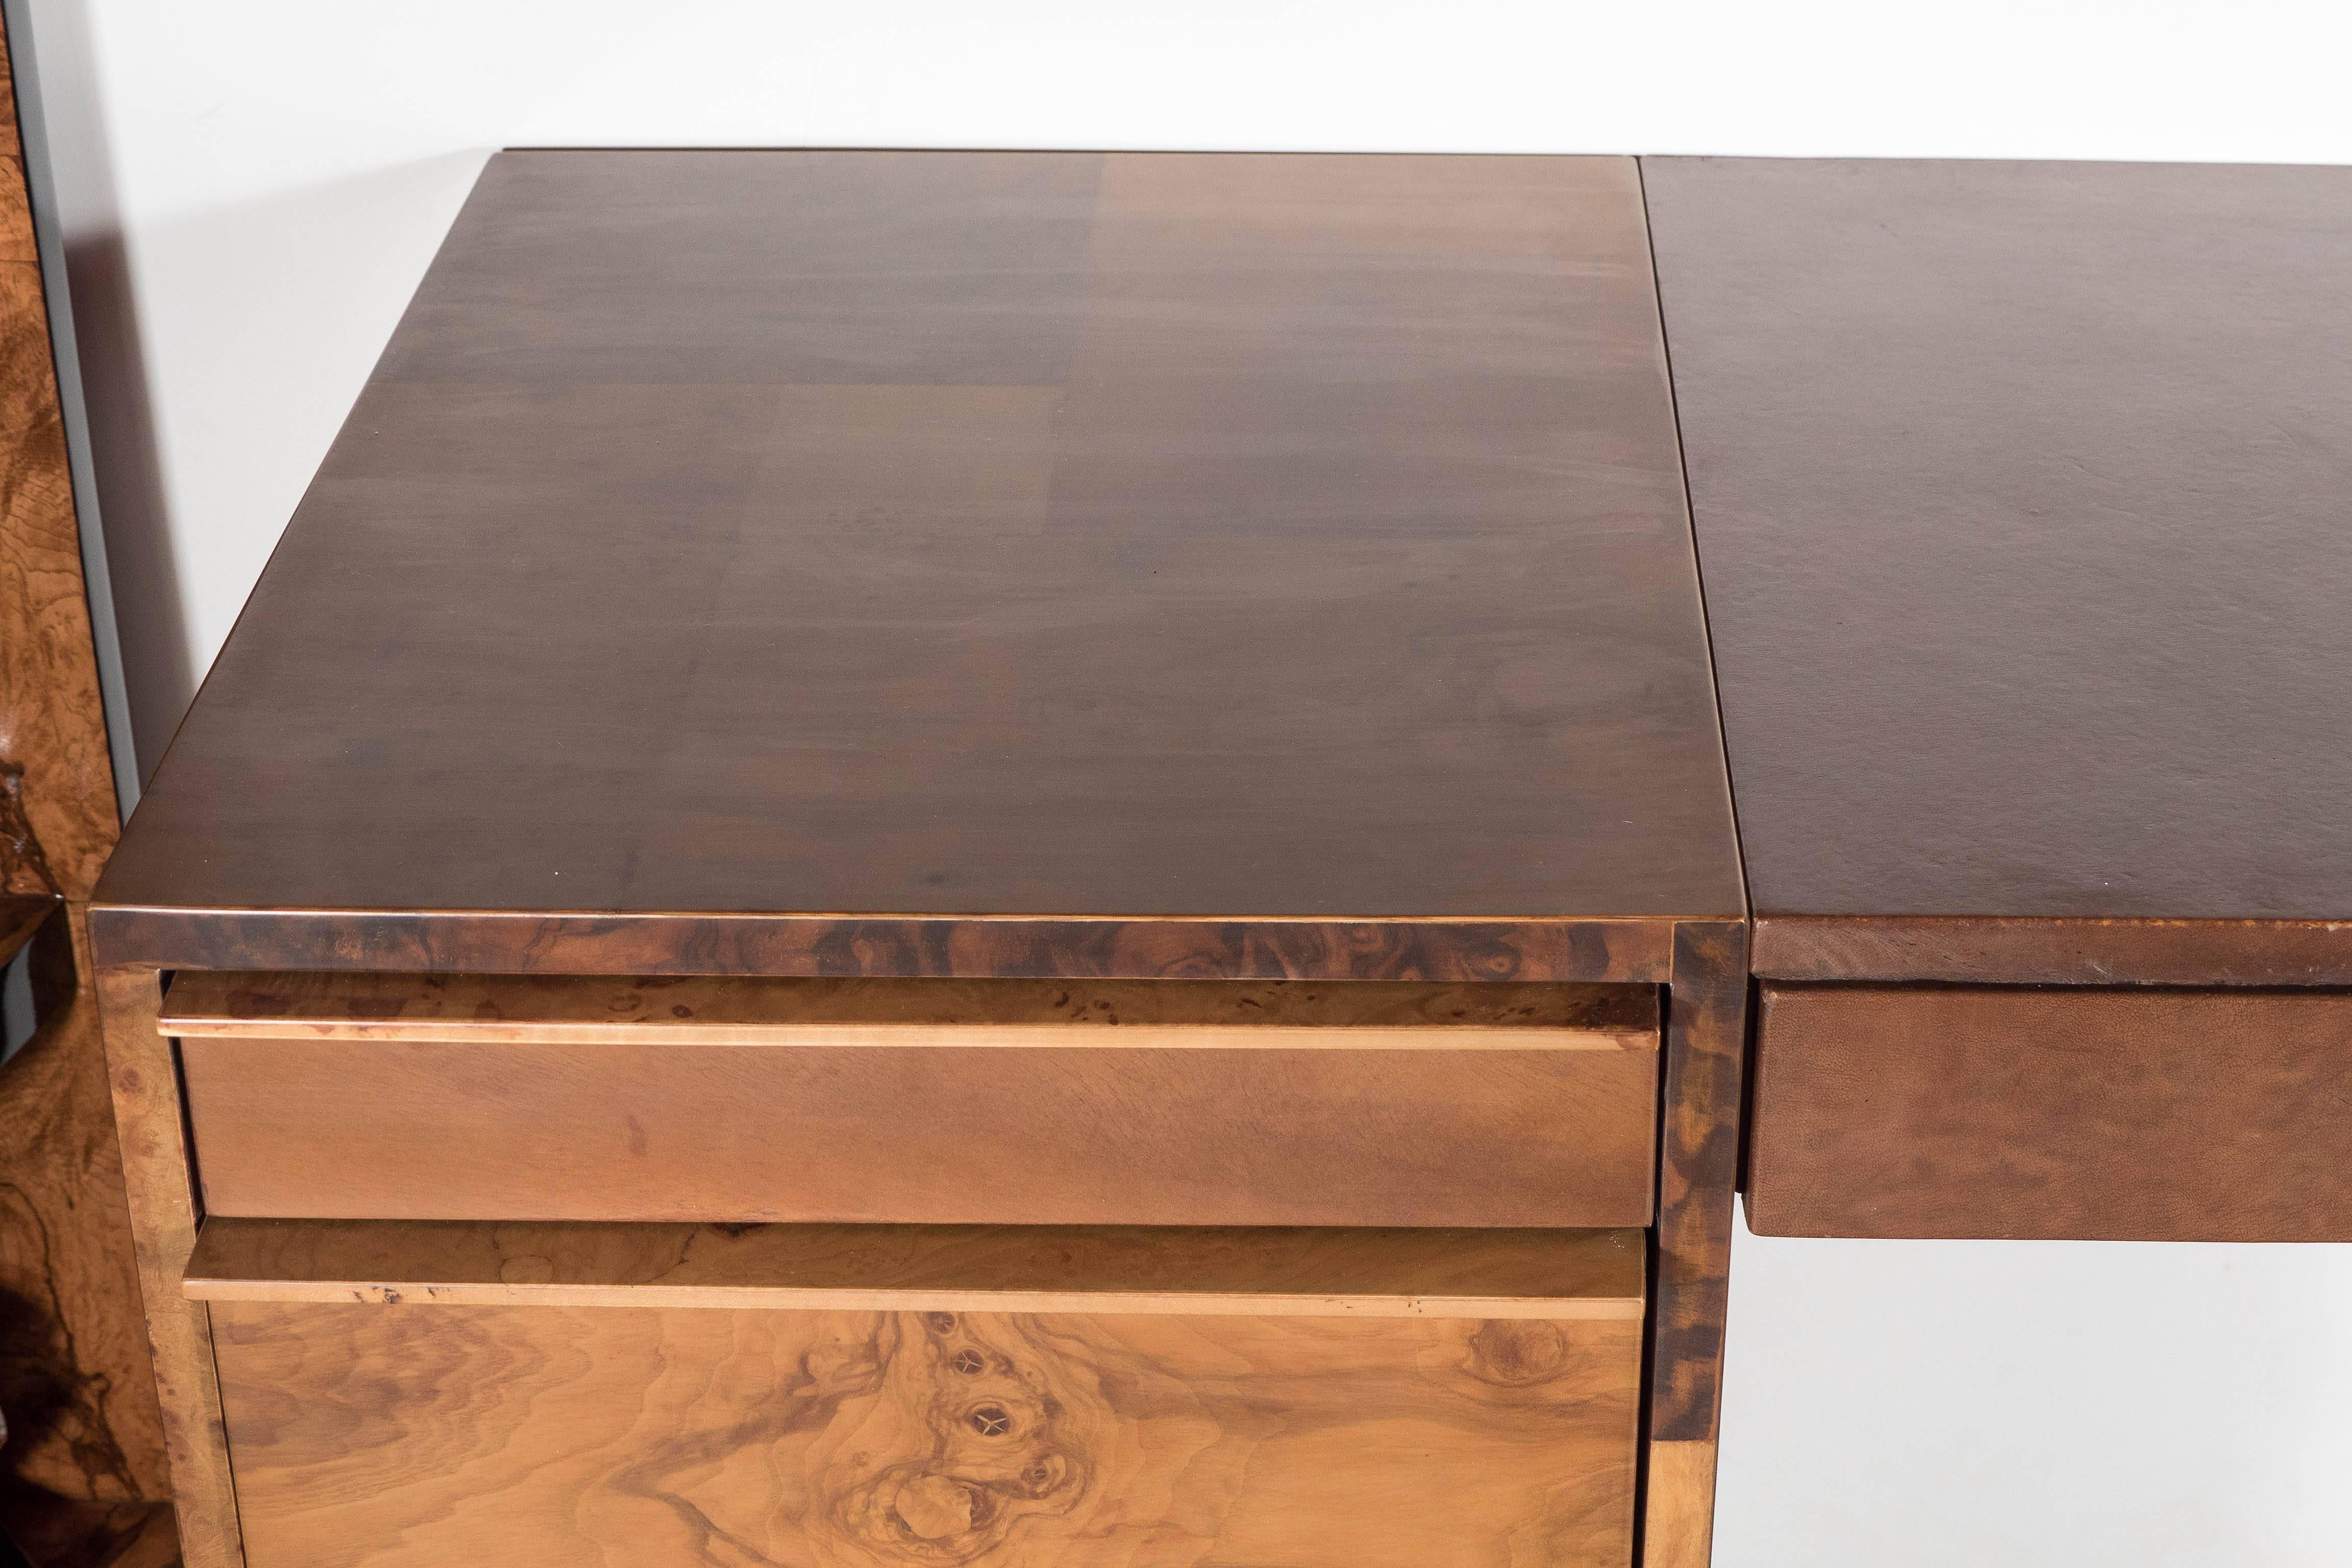 An exquisite Mid-Century Modernist executive desk in maple and olive burl wood patchwork design. This example has seven smooth-gliding drawers, two of which provide generous file storage, and a lovely rich cognac leather-clad inset top. This piece